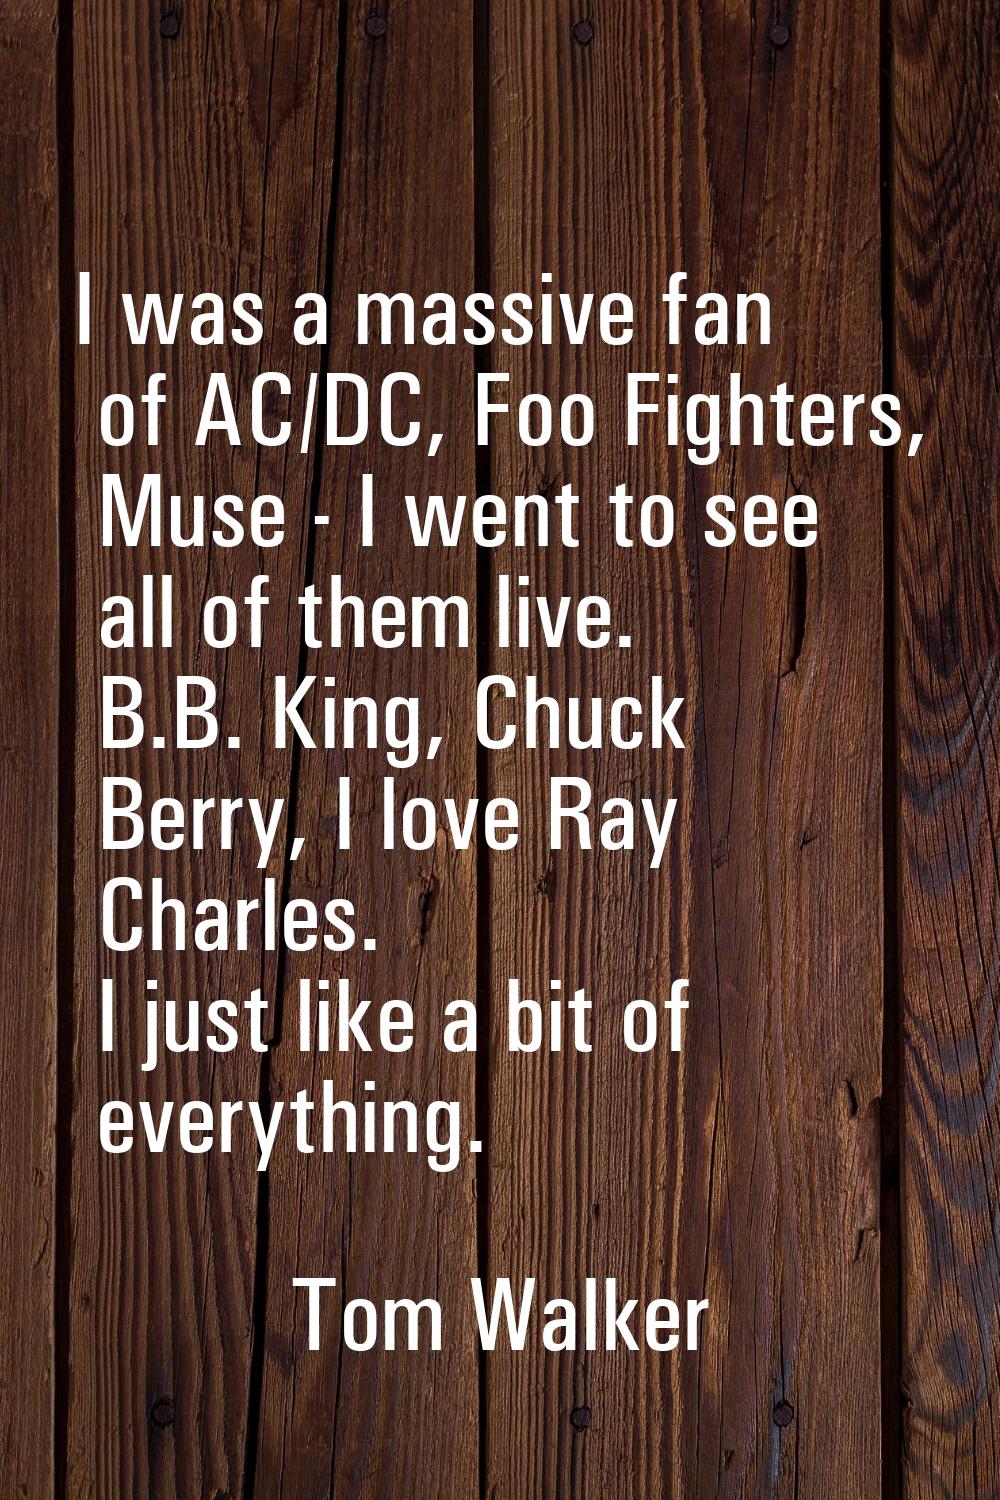 I was a massive fan of AC/DC, Foo Fighters, Muse - I went to see all of them live. B.B. King, Chuck